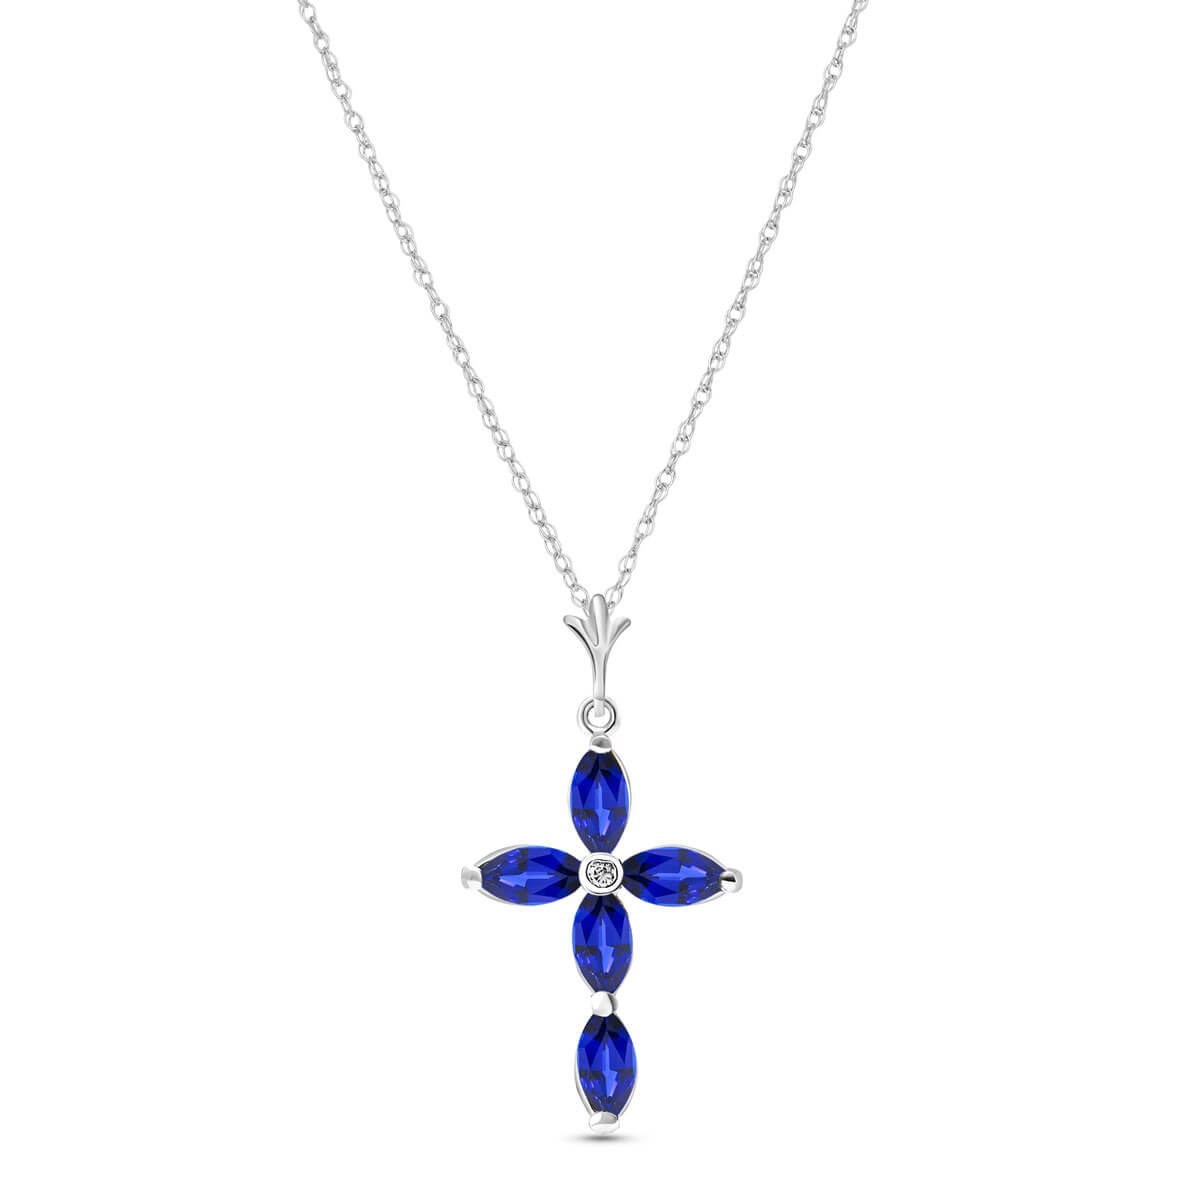 Marquise Cut Sapphire Pendant Necklace 1.1 ctw in 9ct White Gold